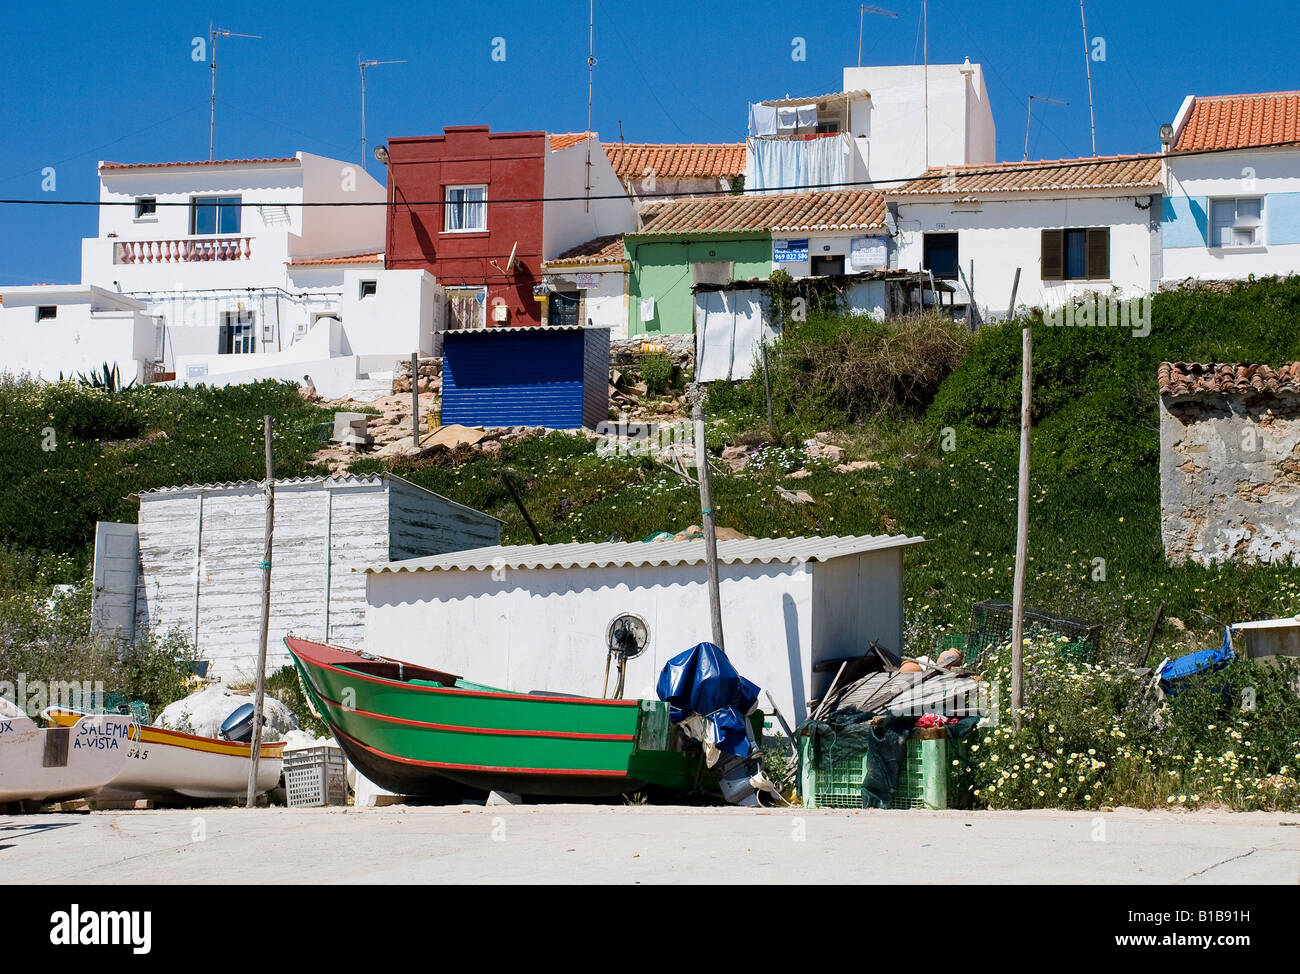 the fishing town of salema Stock Photo